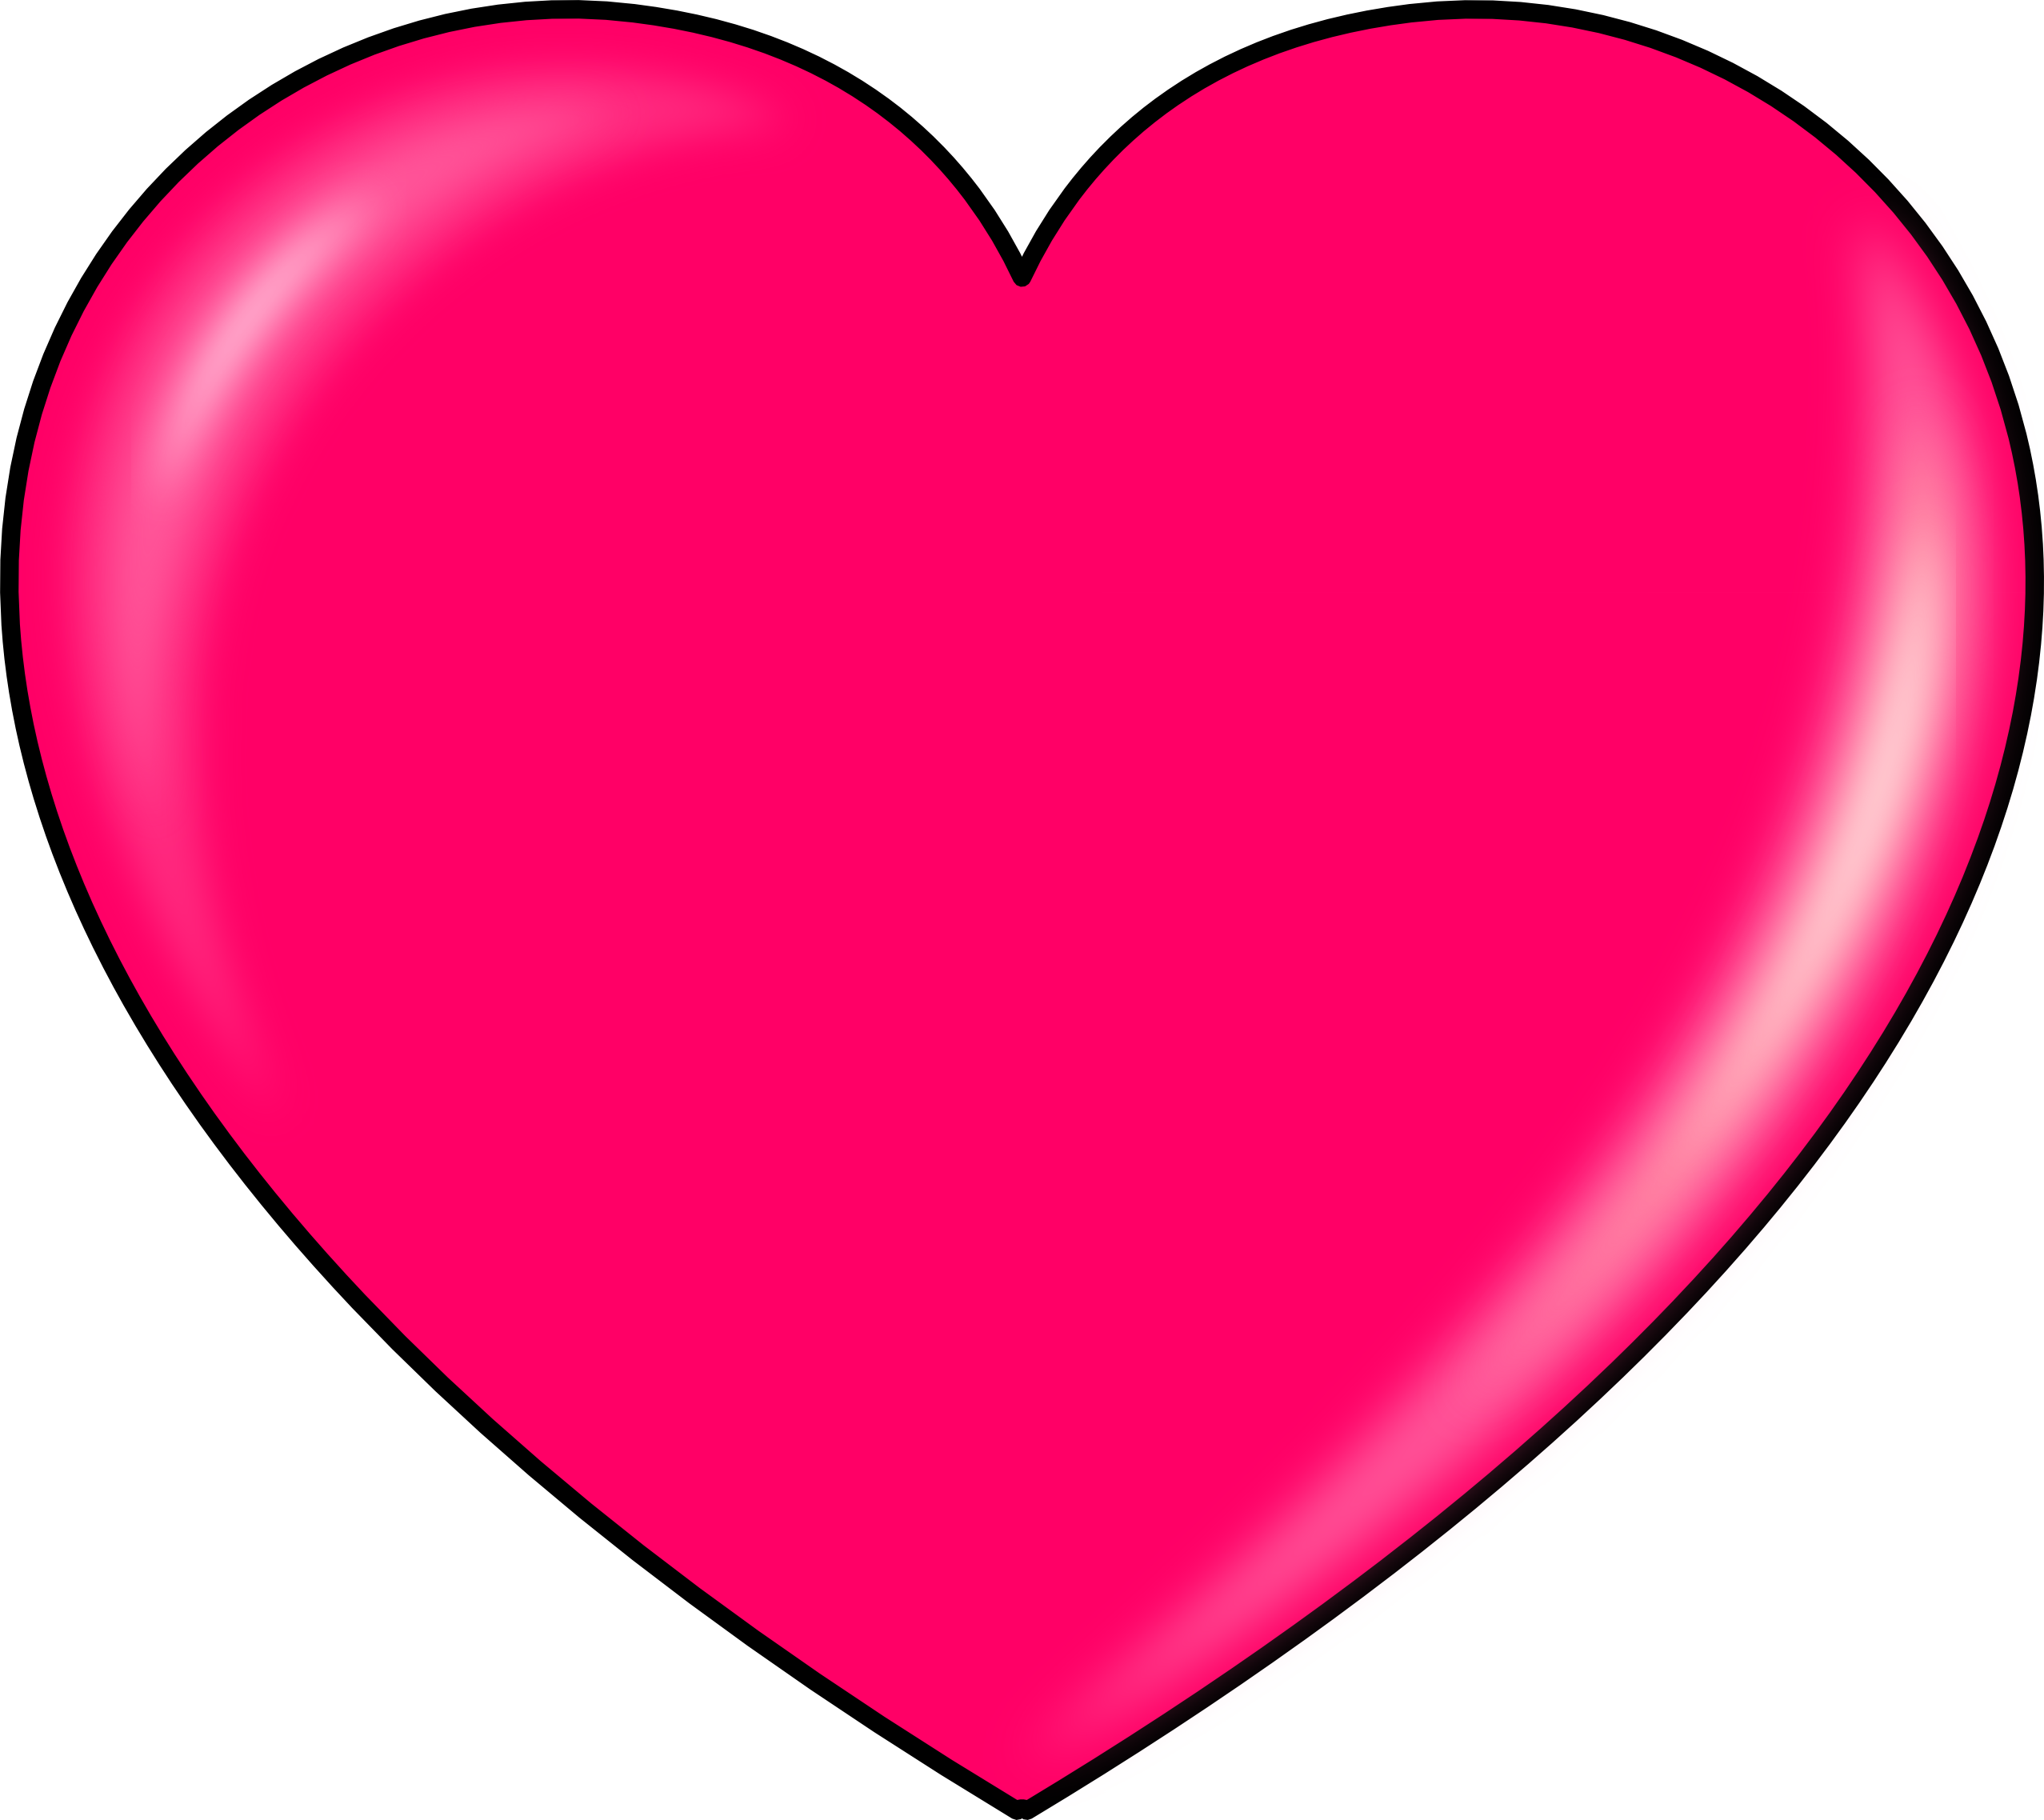 Pink Heart Png Image, Free Download - Heart, Transparent background PNG HD thumbnail